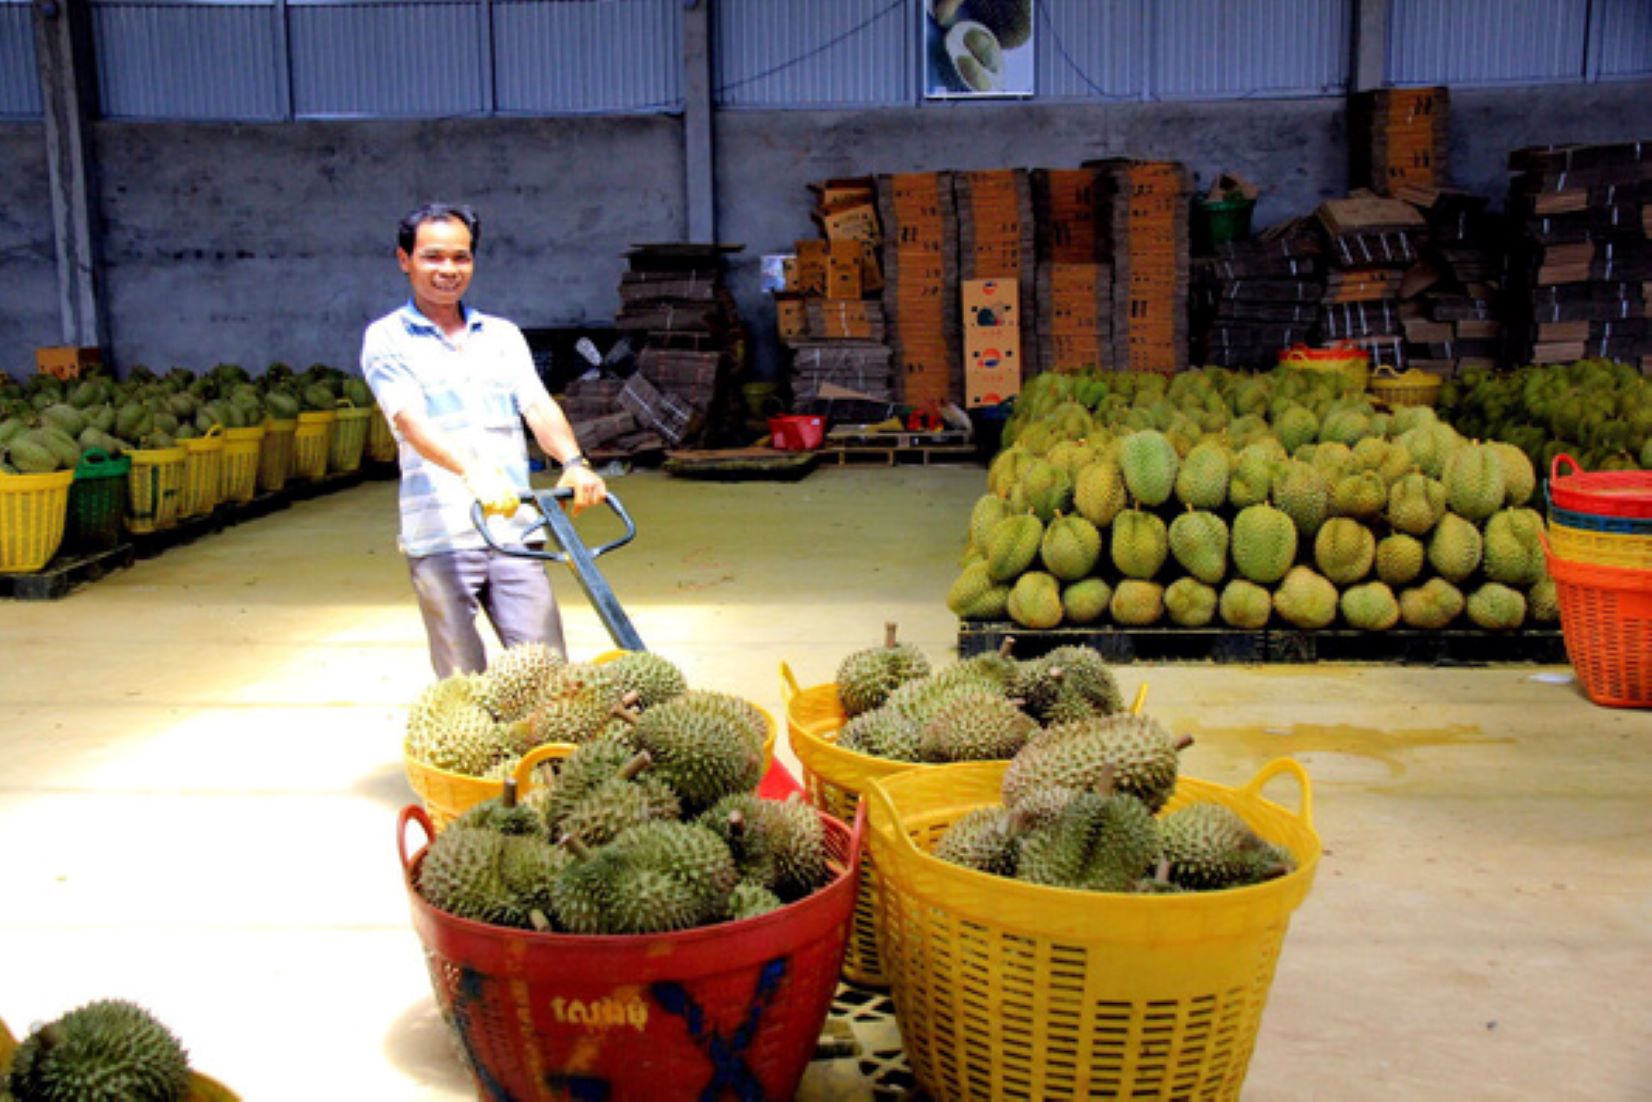 Vietnam’s Fruit, Vegetable Exports Rise 29 Percent On Demand Boost From China